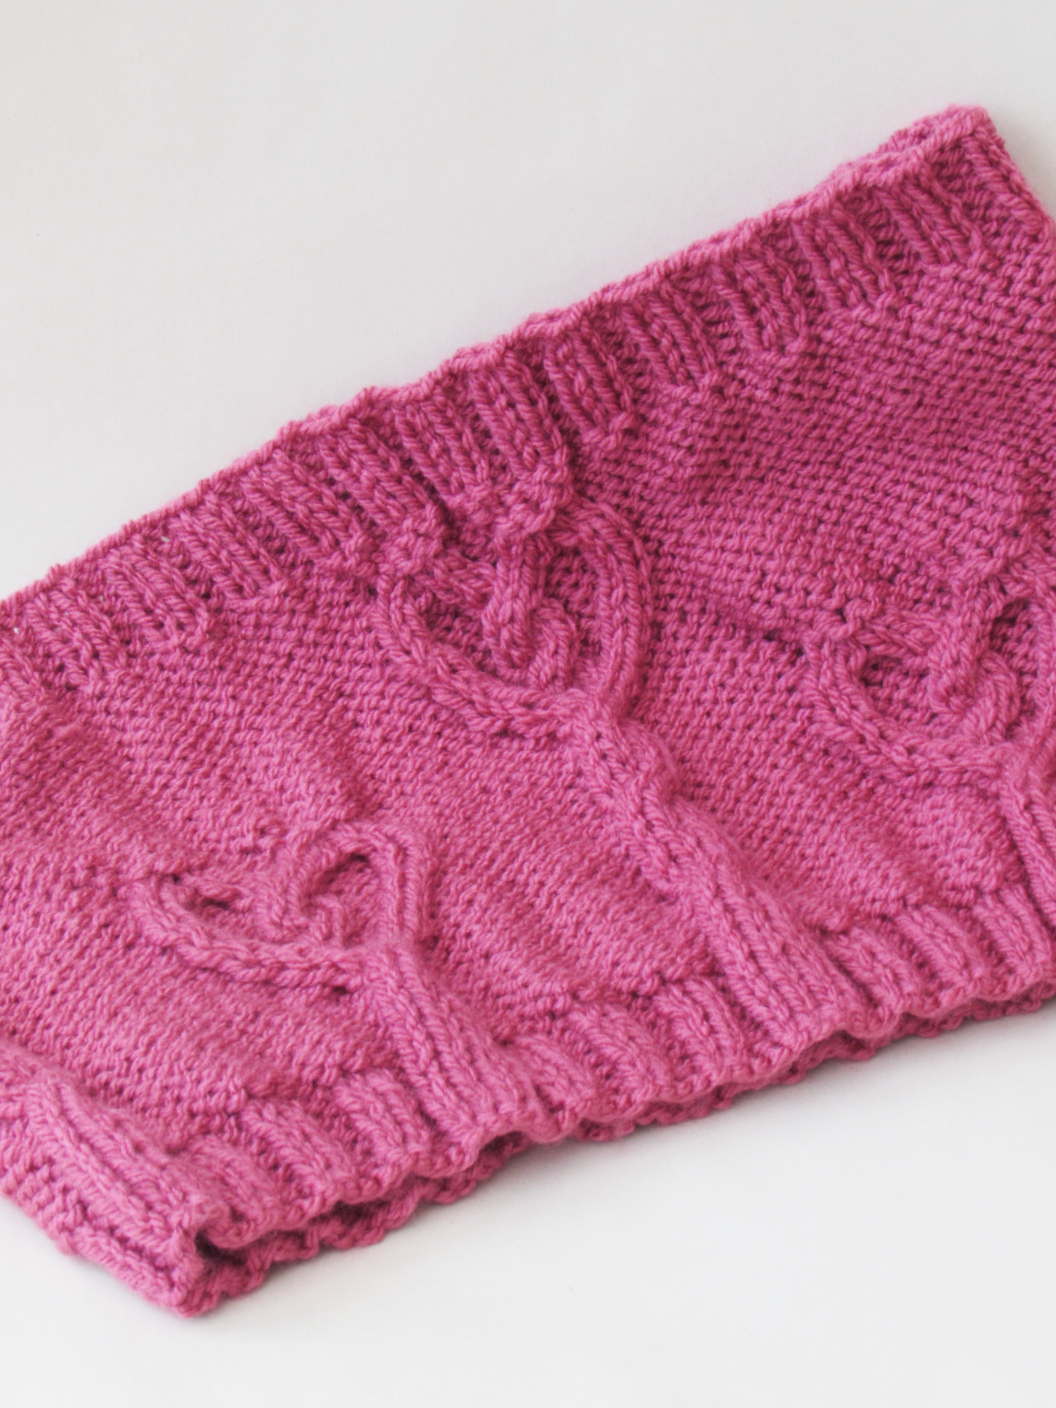 Twisted Hearts Cowl knitting pattern